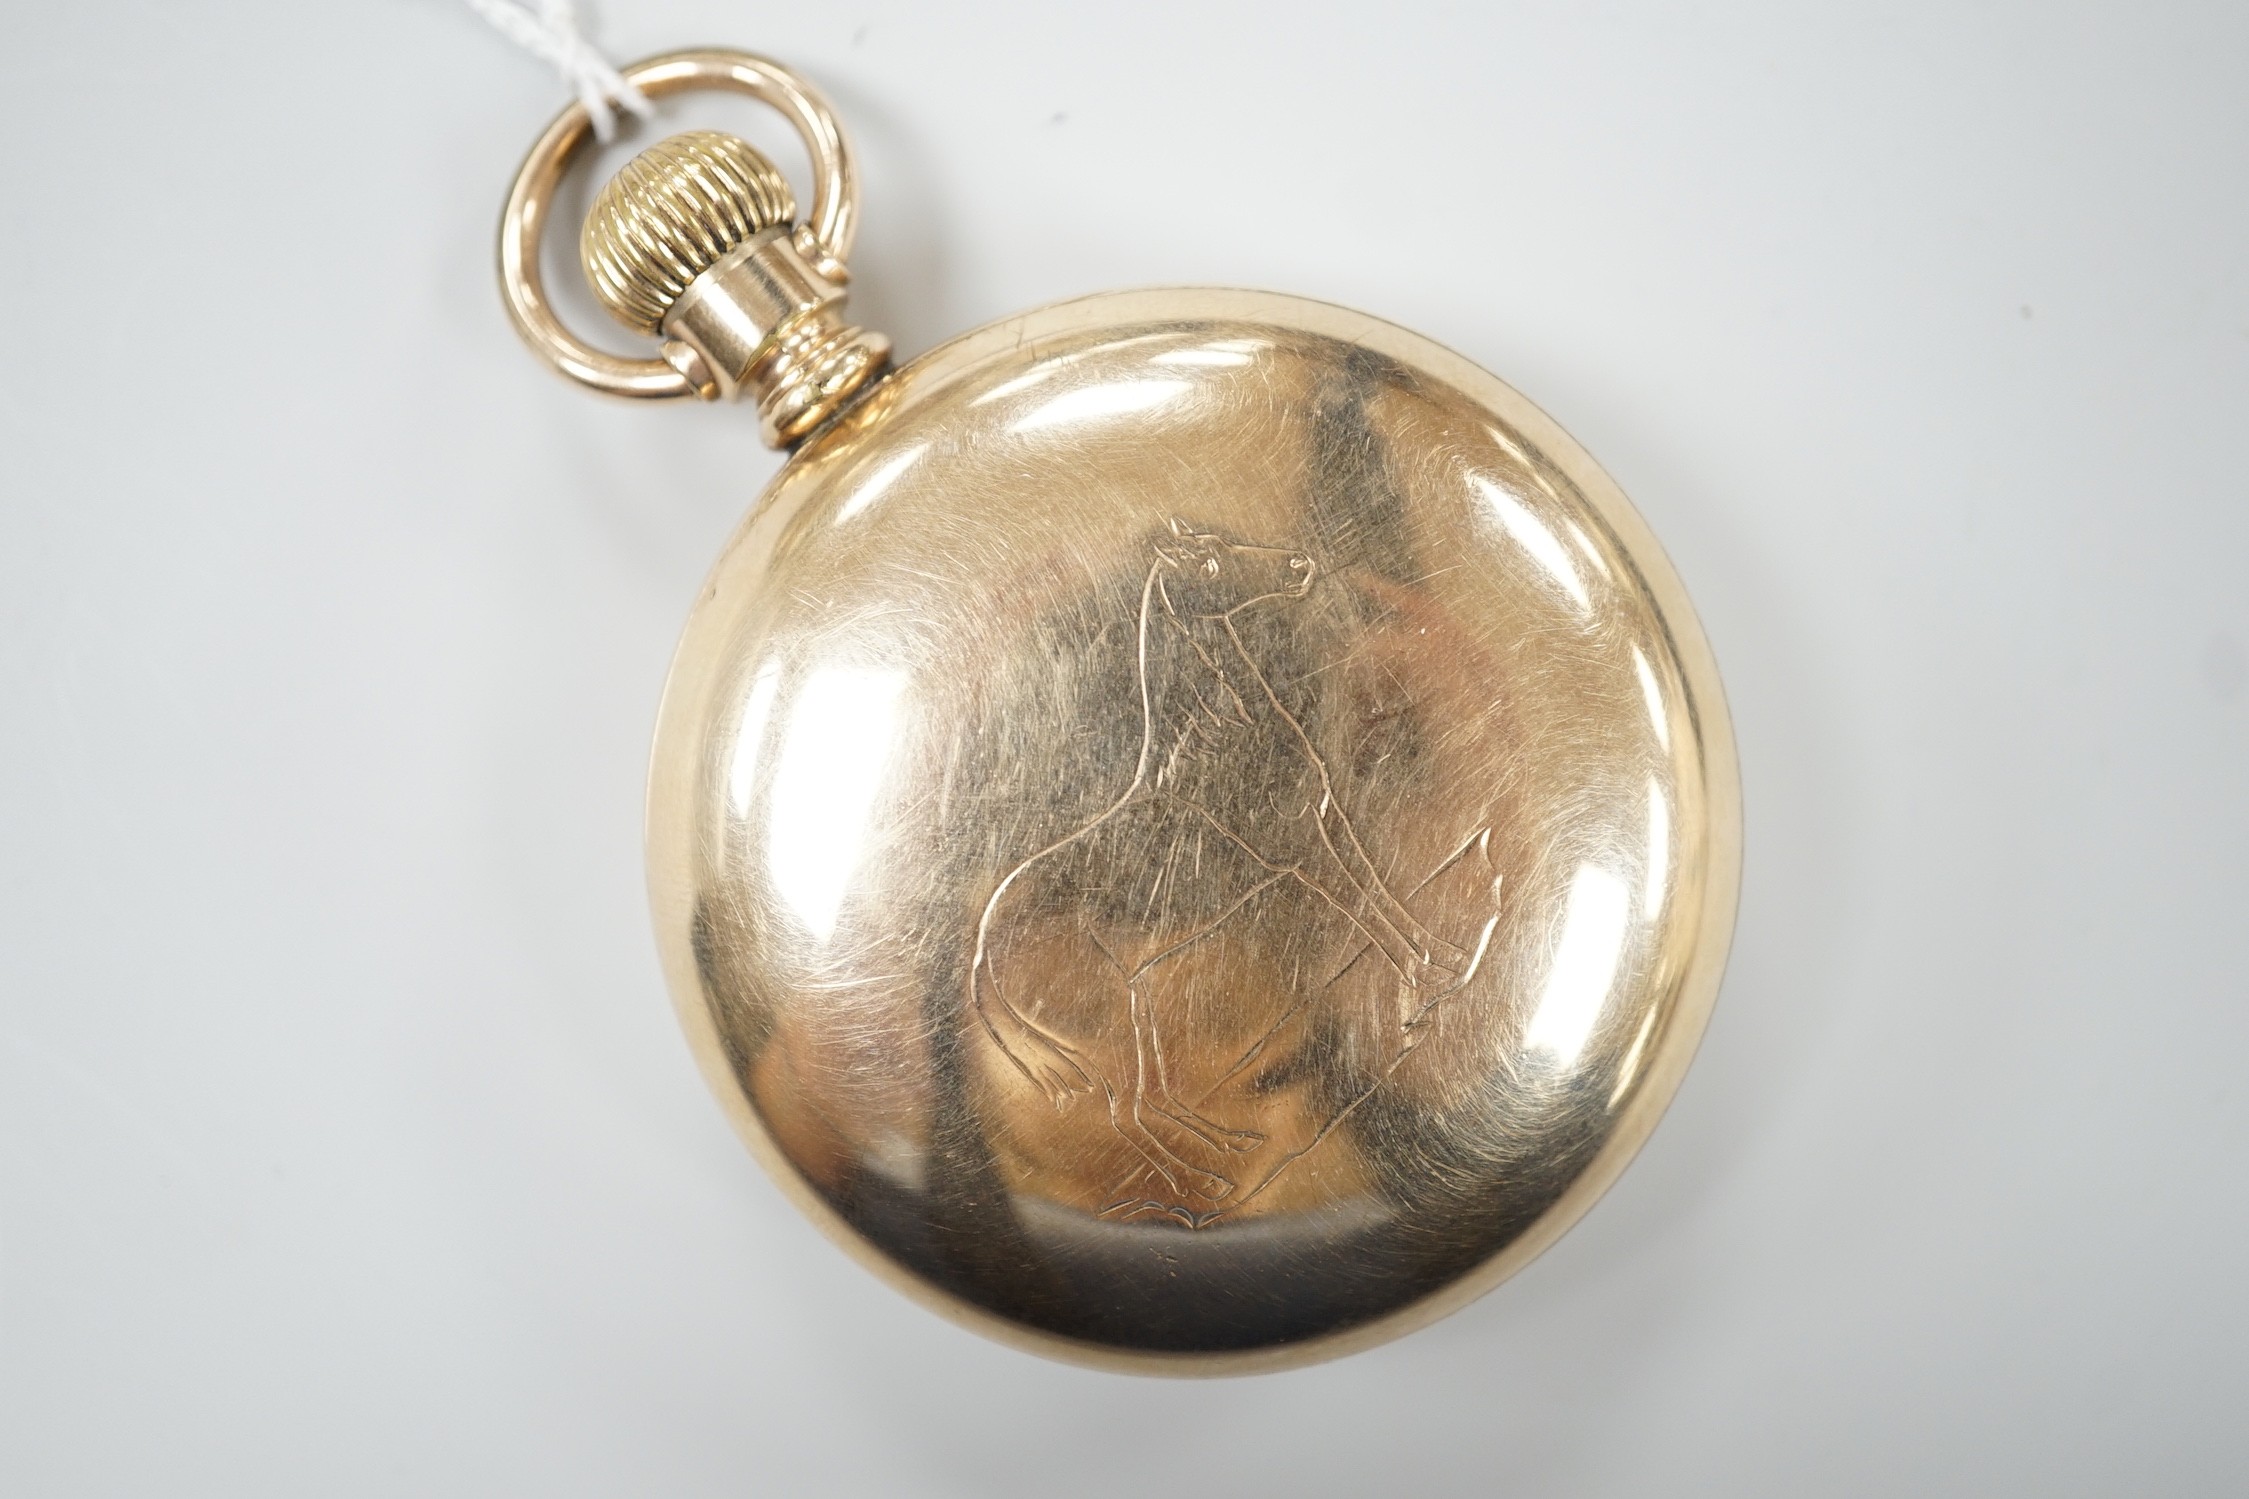 An American gold plated Rockford Watch Co. keyless open faced pocket watch, with Roman dial and subsidiary seconds, the case back engraved with a horse.